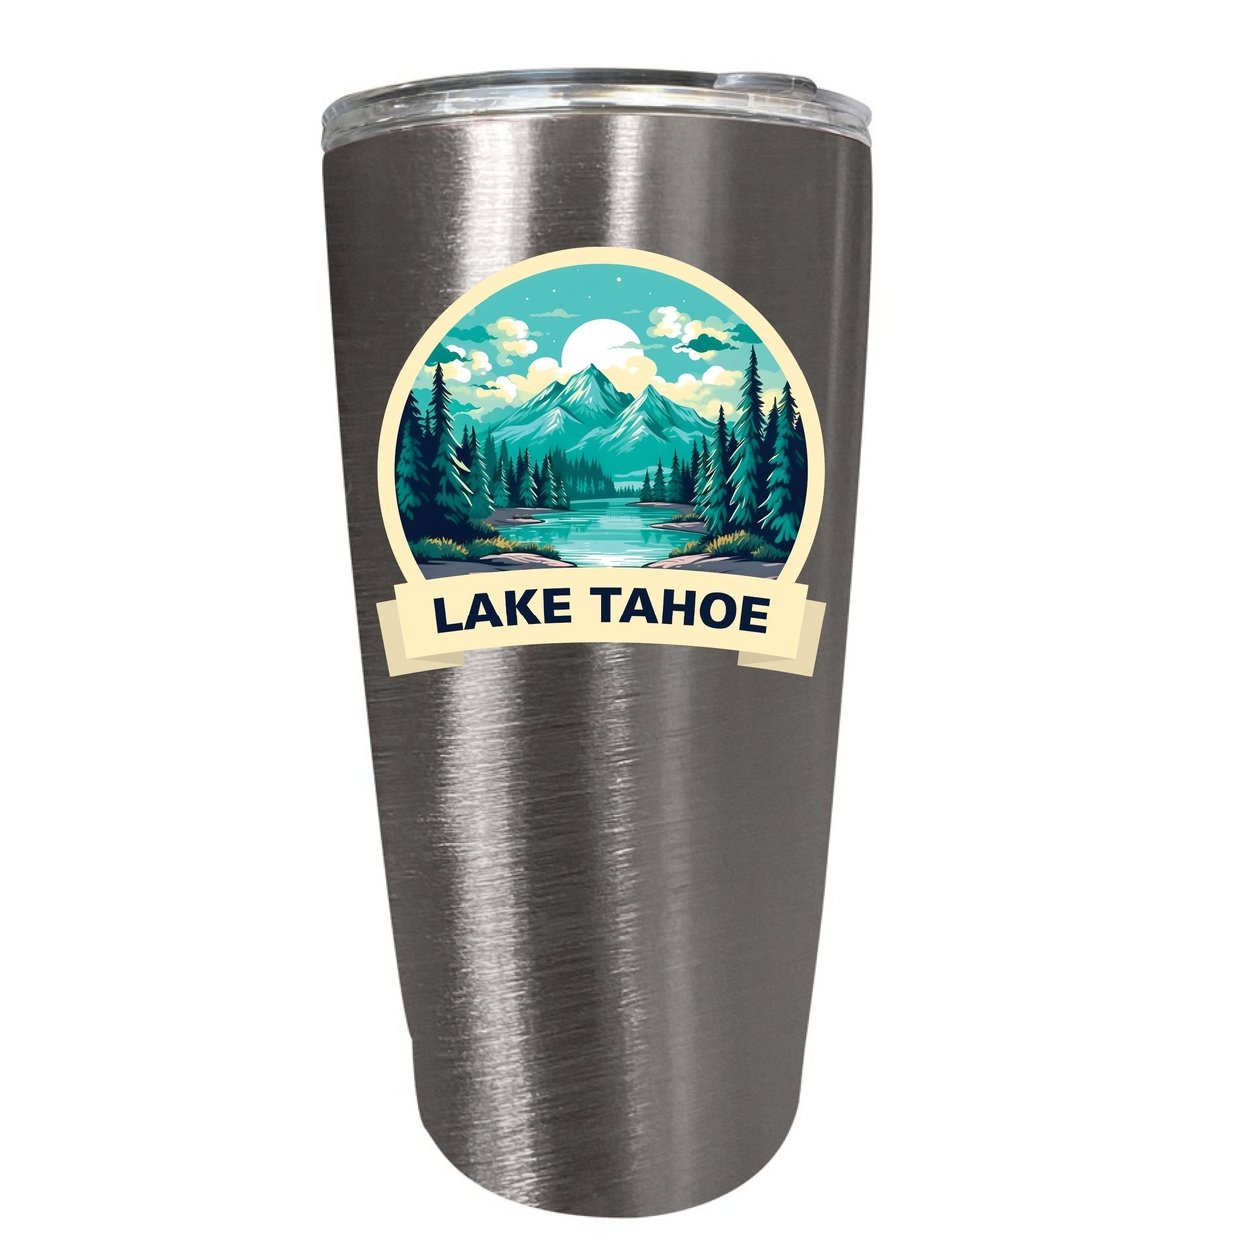 Lake Tahoe California Souvenir 16 Oz Stainless Steel Insulated Tumbler - Navy,,2-Pack